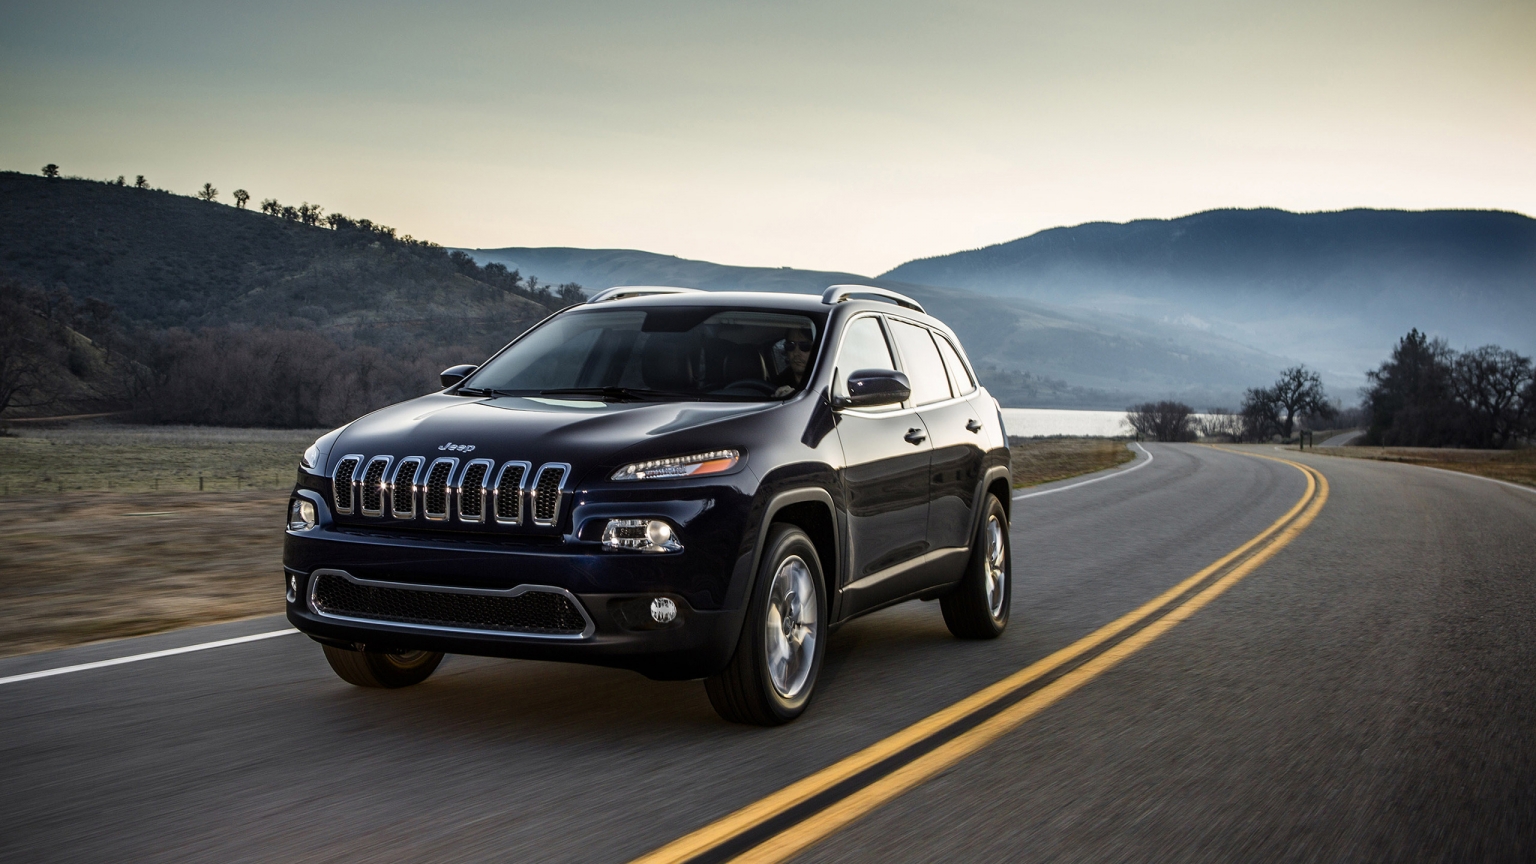 Jeep Cherokee 2014 Edition for 1536 x 864 HDTV resolution